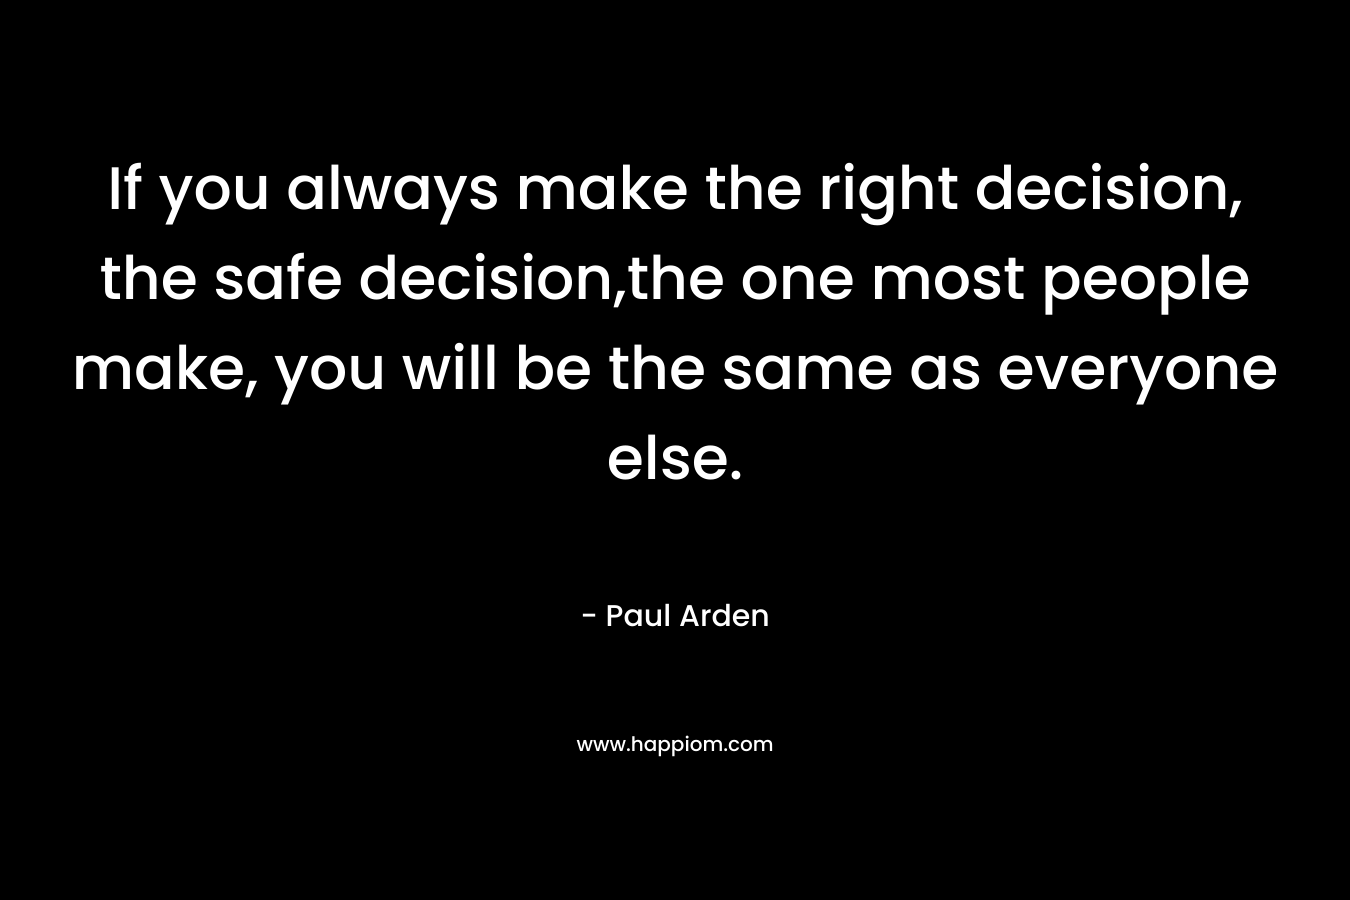 If you always make the right decision, the safe decision,the one most people make, you will be the same as everyone else. – Paul Arden